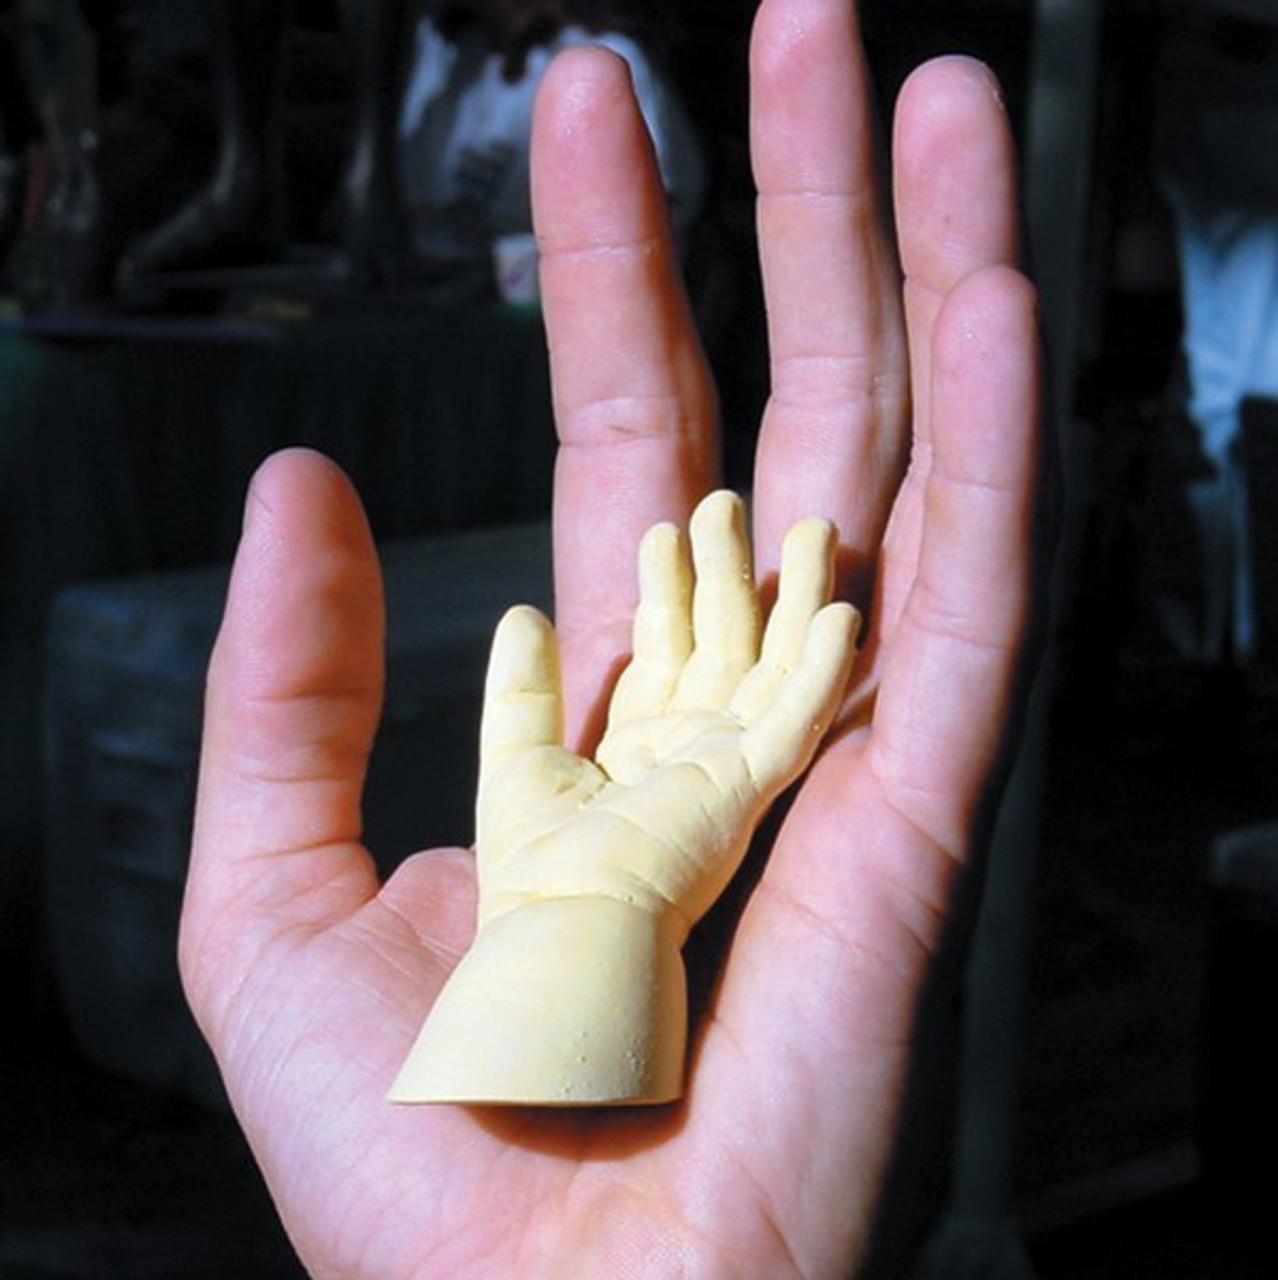 How To Cast a Baby or Child Hand Using the Accu-Cast™ Baby / Child Hand  Casting Kit 